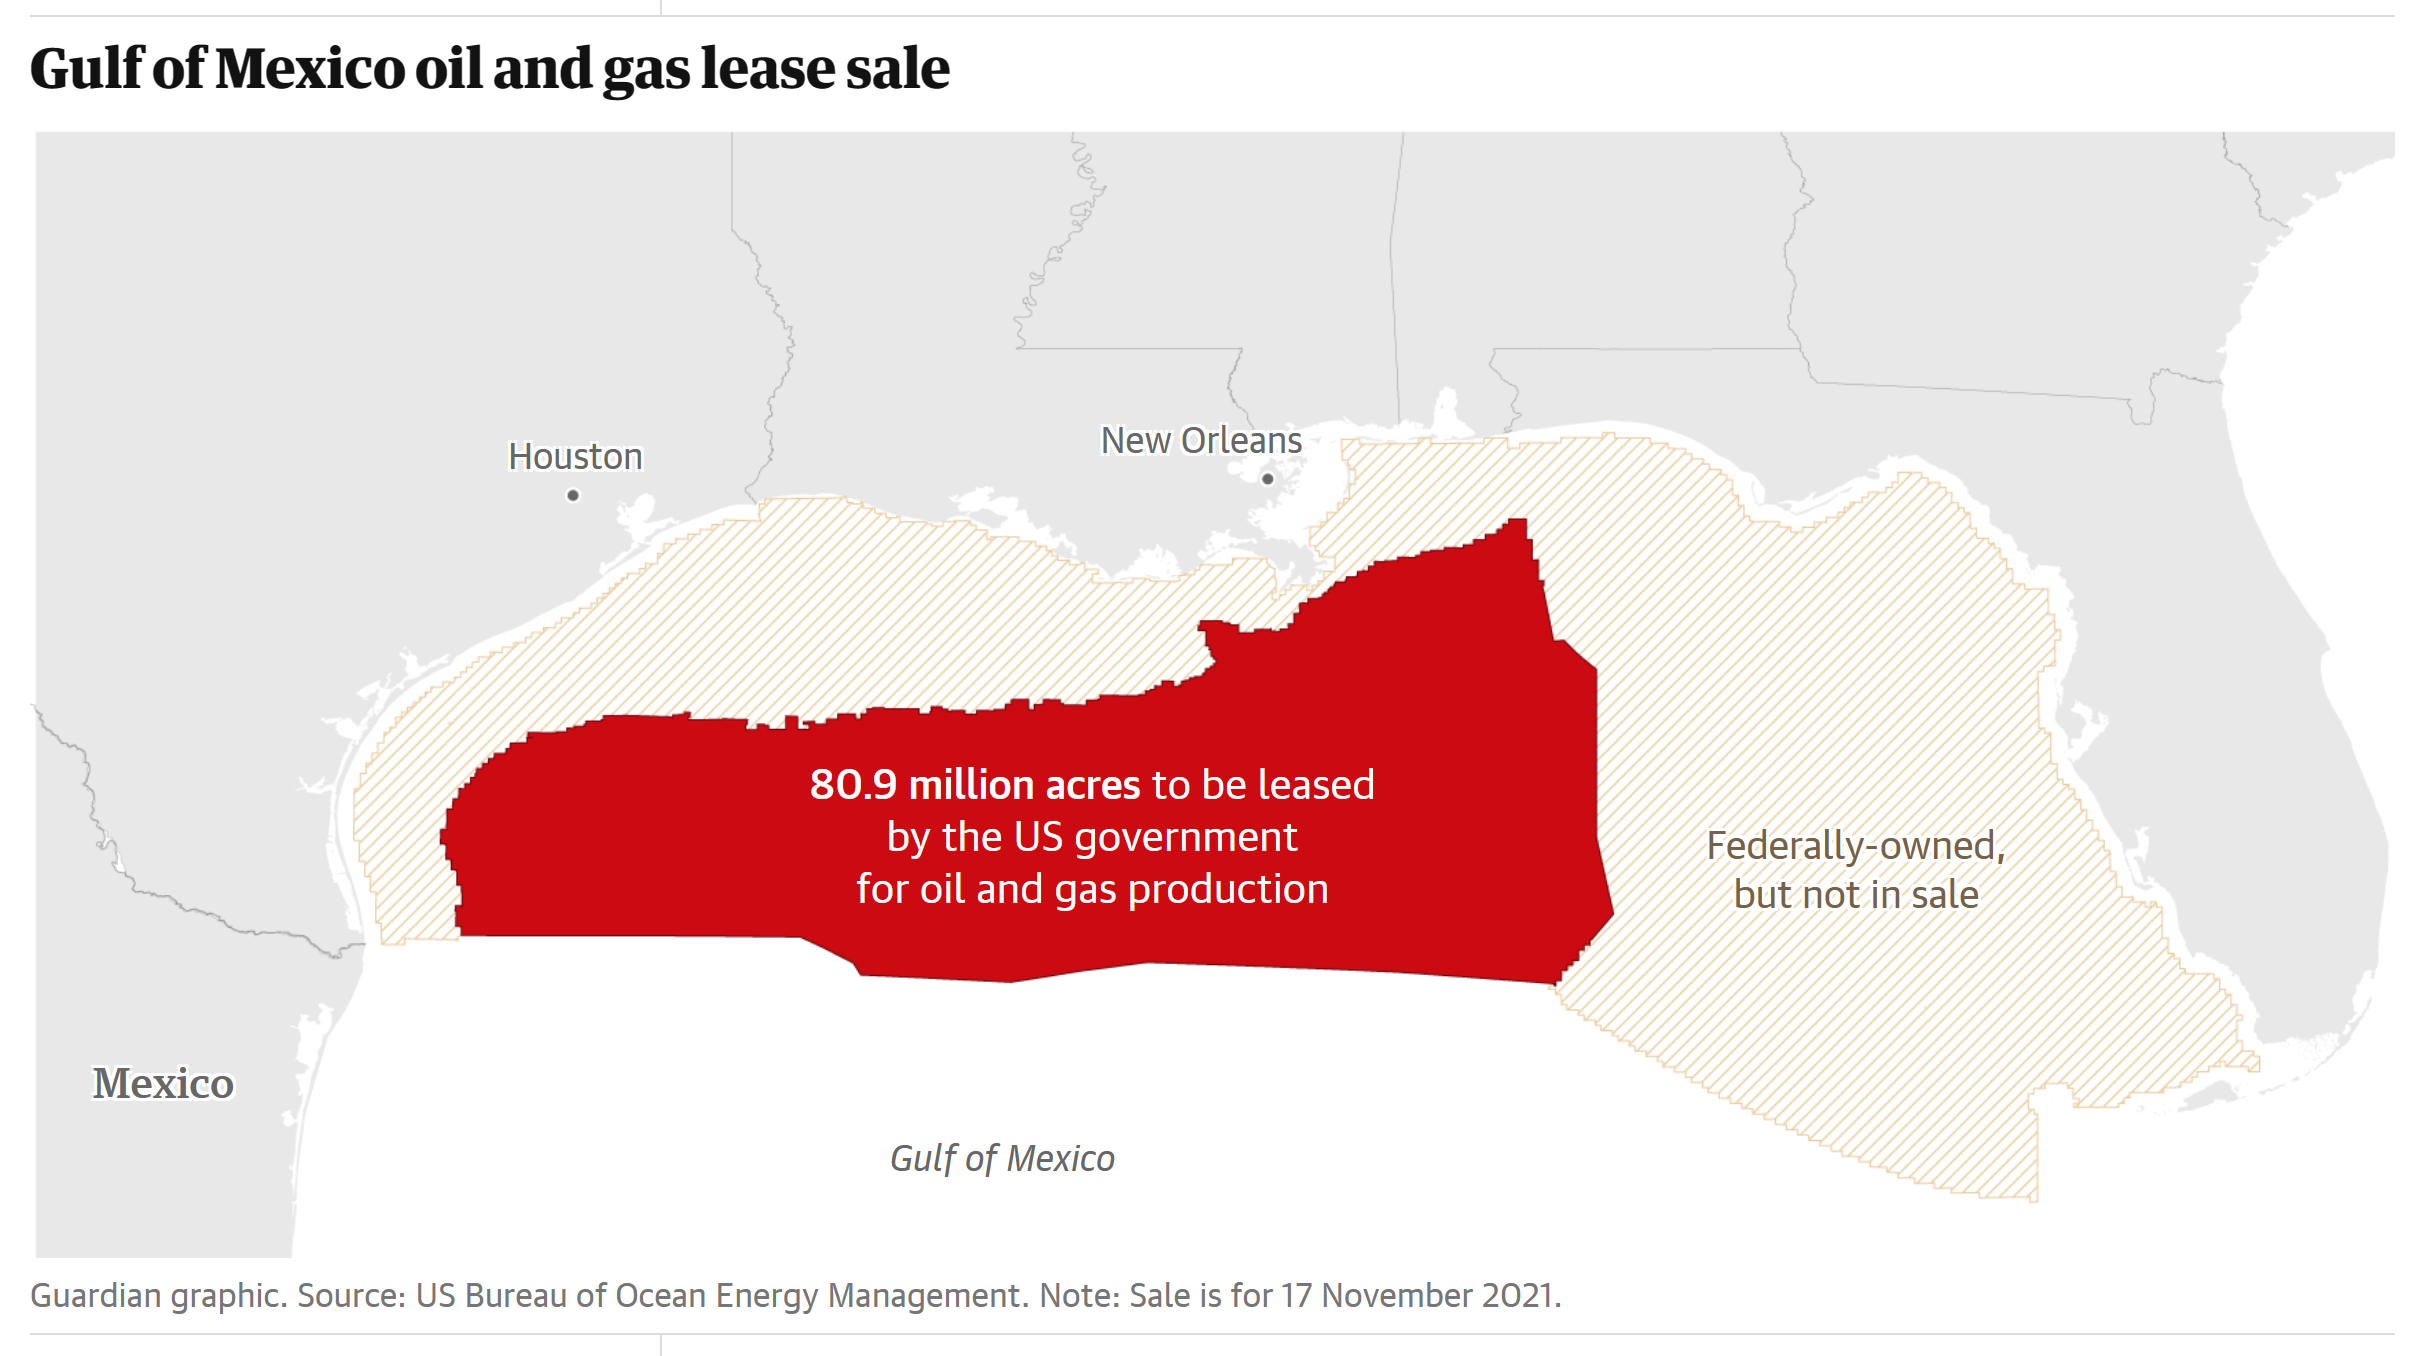 Map showing the area of the Gulf of Mexico covered by the U.S. oil and gas lease sale on 17 November 2021. Source: US Bureau of Ocean Energy Management. Graphic: The Guardian